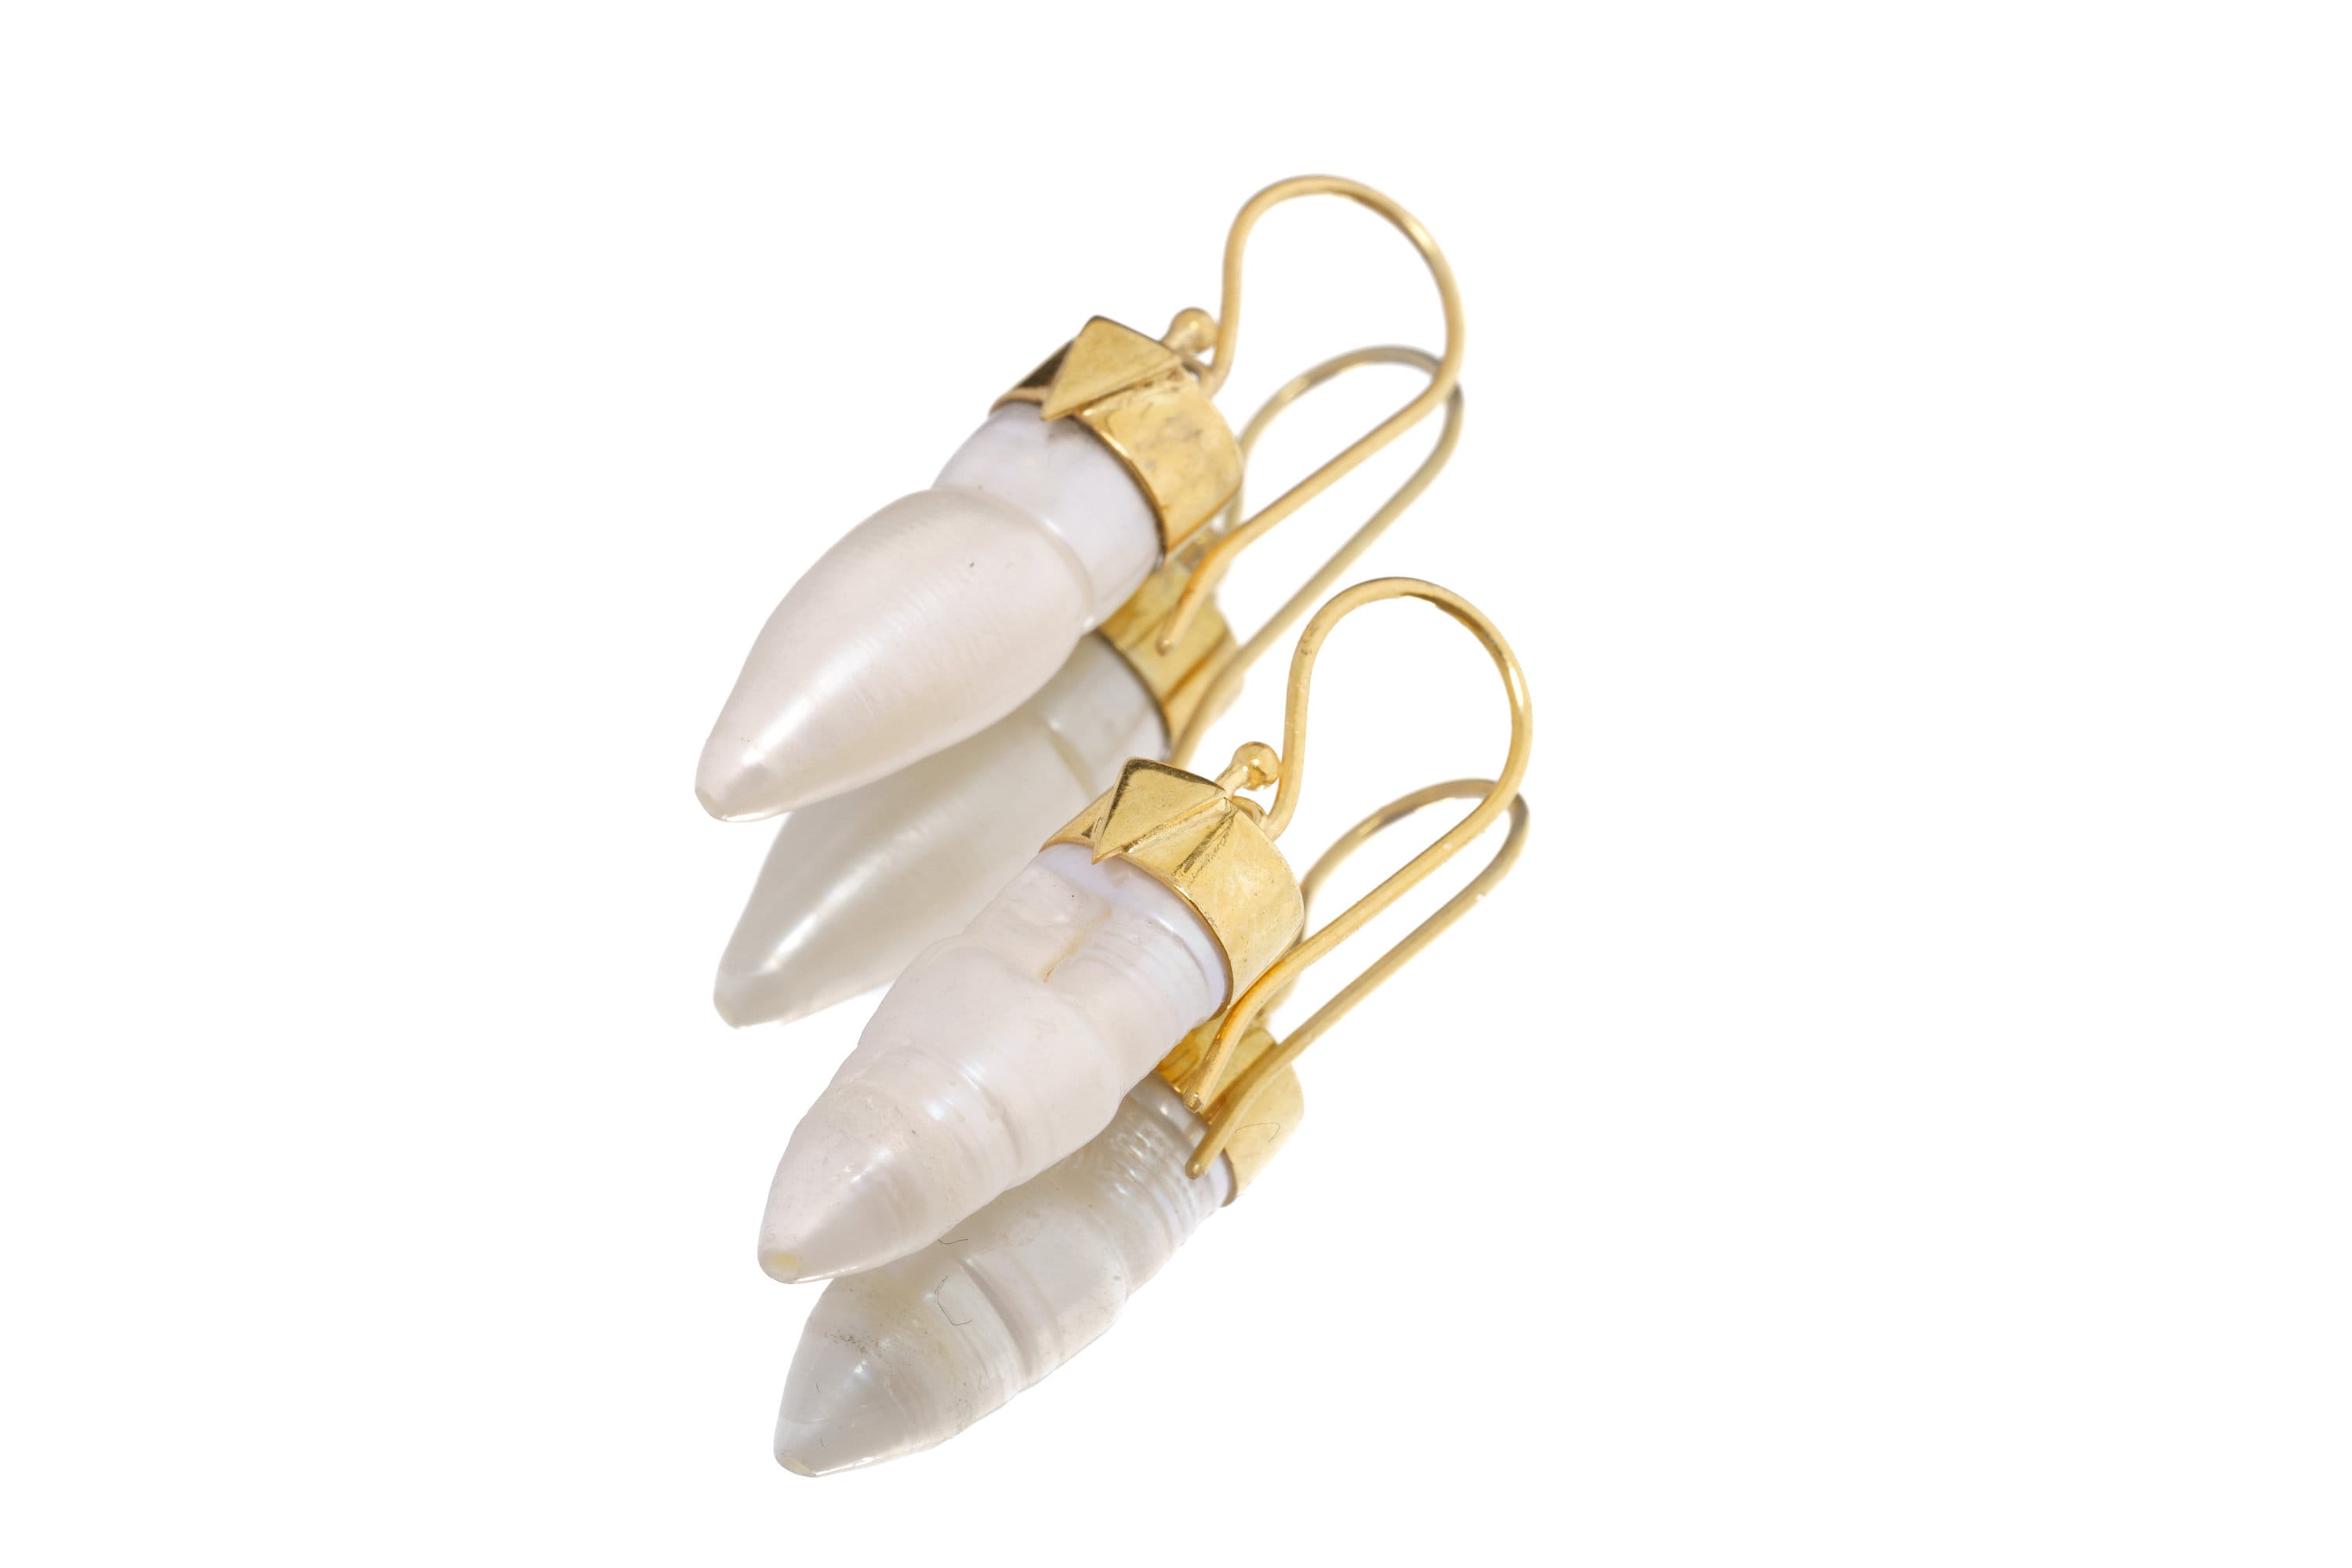 Pair of Pearls - 925 Gold Plated Sterling Silver - Dangle Hook Earring